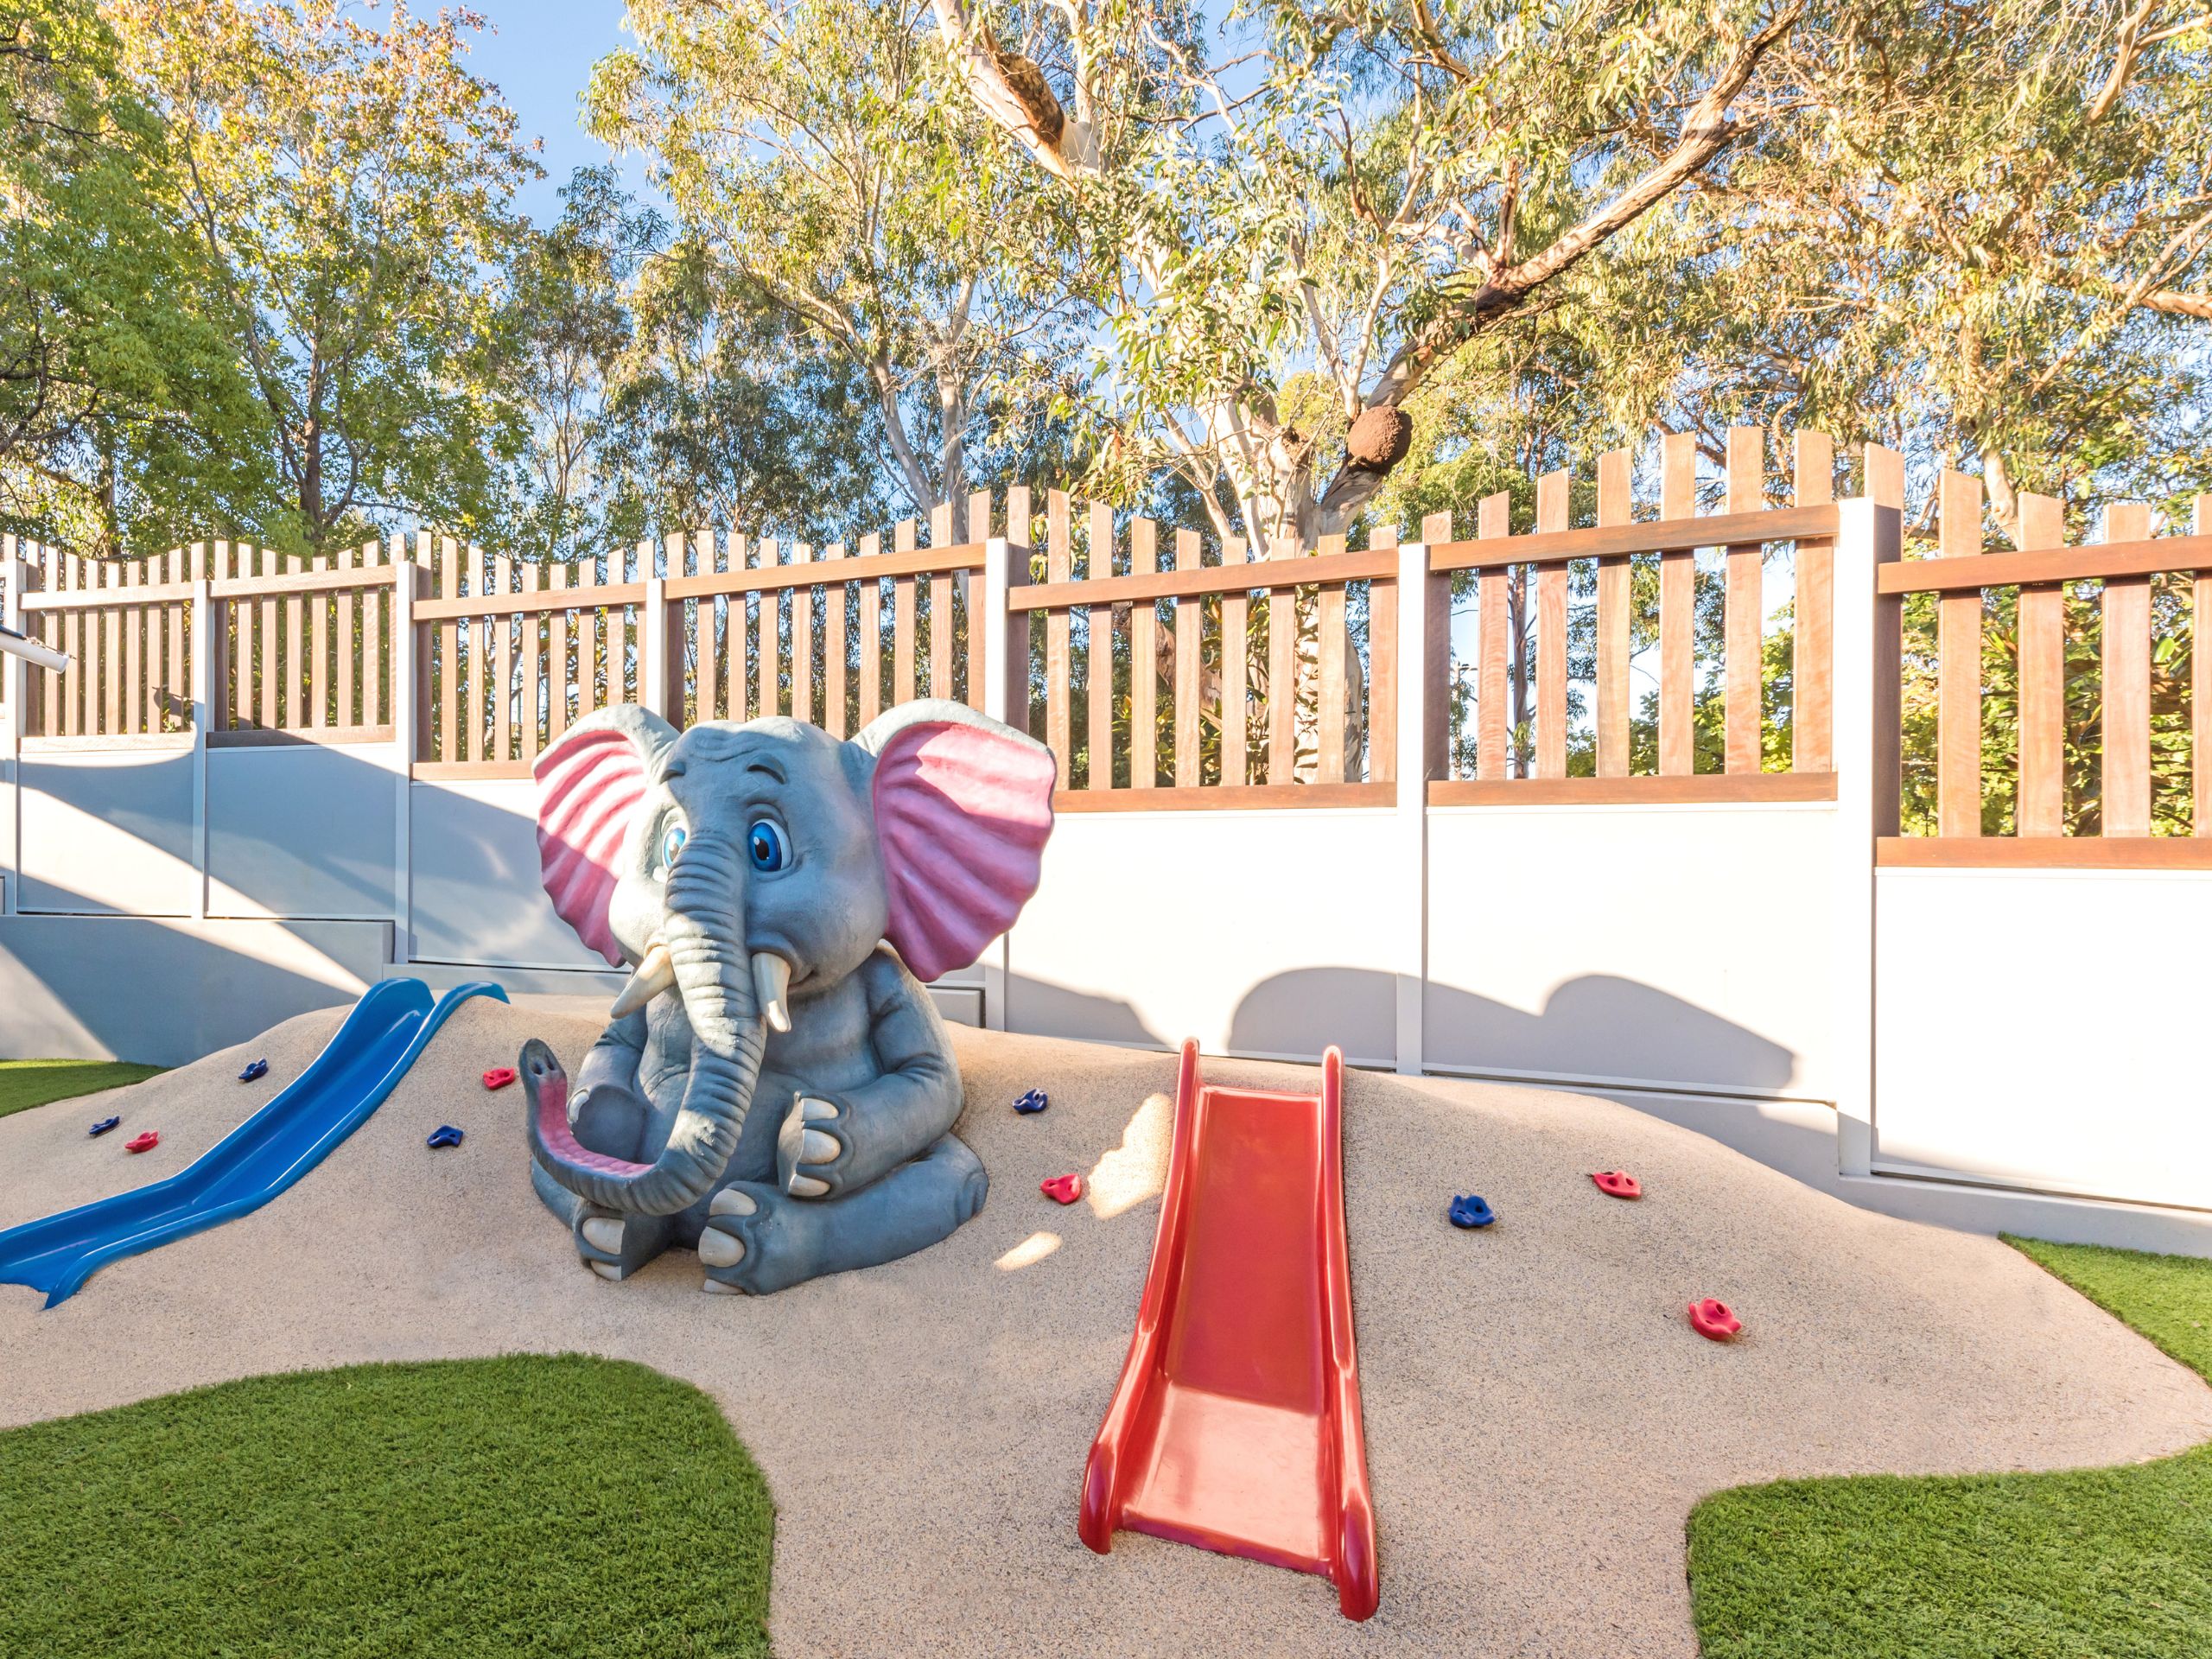 Childcare centres select ModularWalls for their durability and monolithic nature